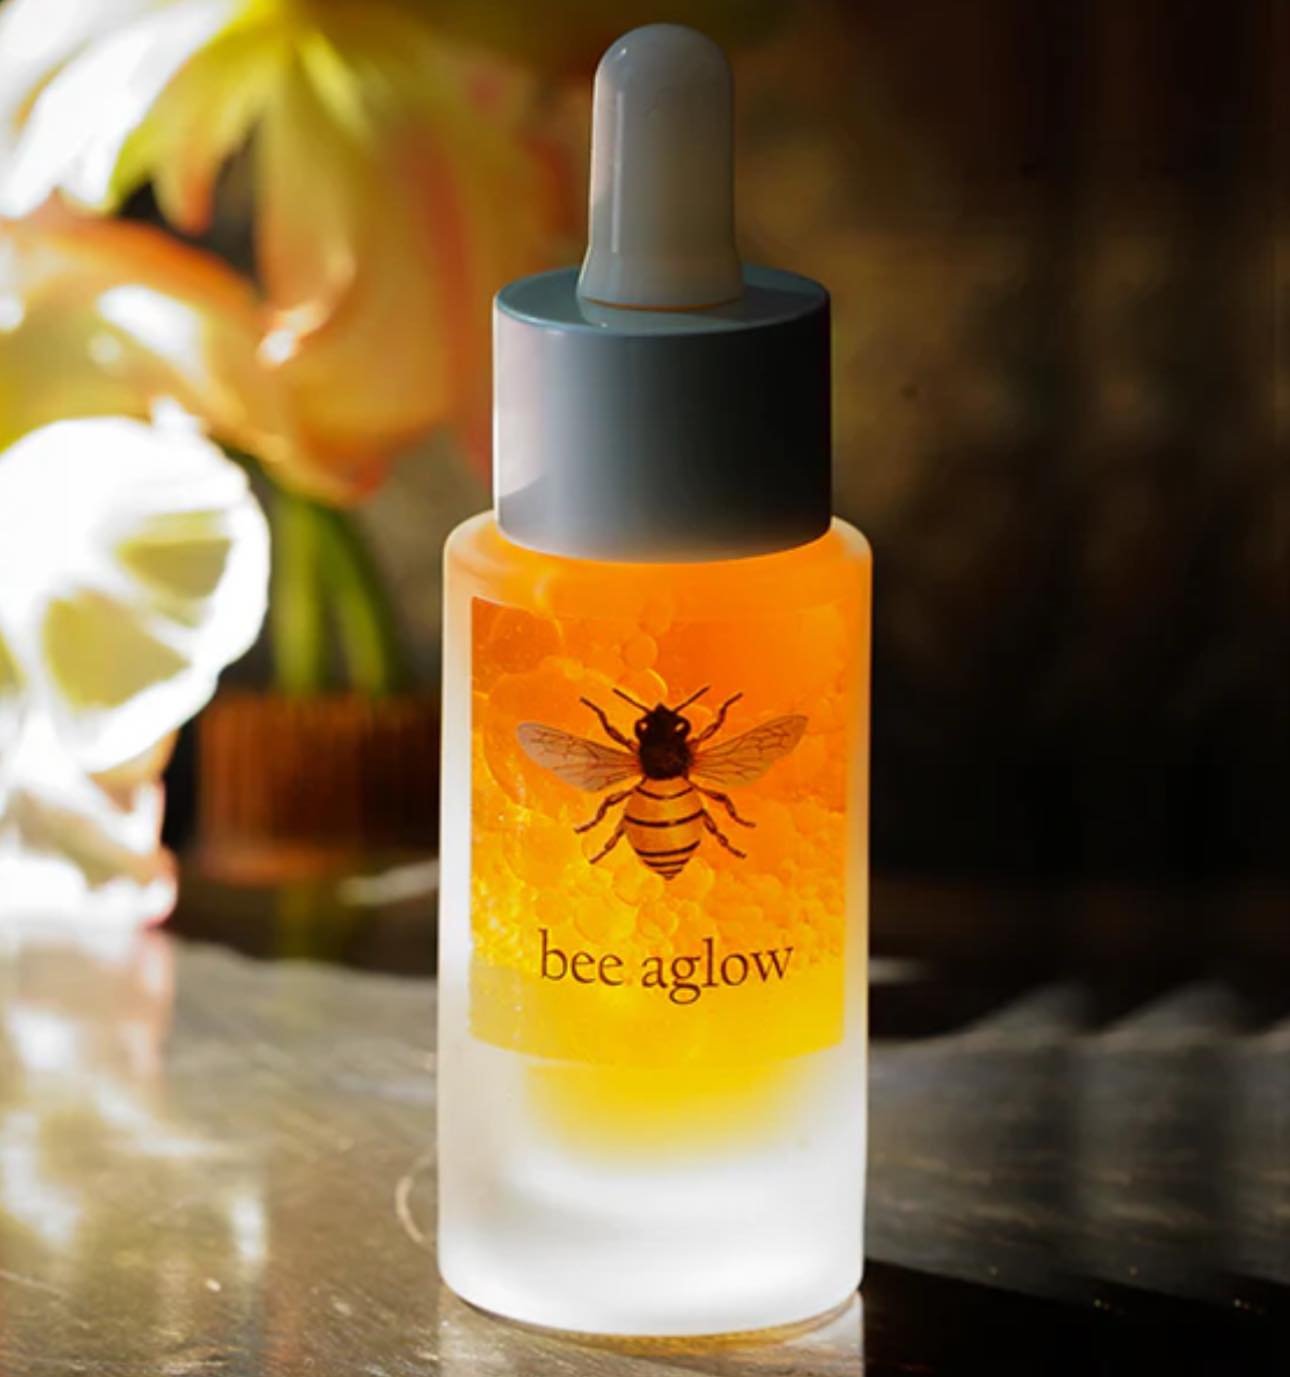 Pamper your skin with this Bee Aglow Beauty Elixir Serum for the Face by @beelineskincare 
Rich in vitamins and antioxidants for a youthful glow!
Enriches the skin to help reduce fine lines and wrinkles
* Rich in anti-oxidants and Vitamins
* Guards t